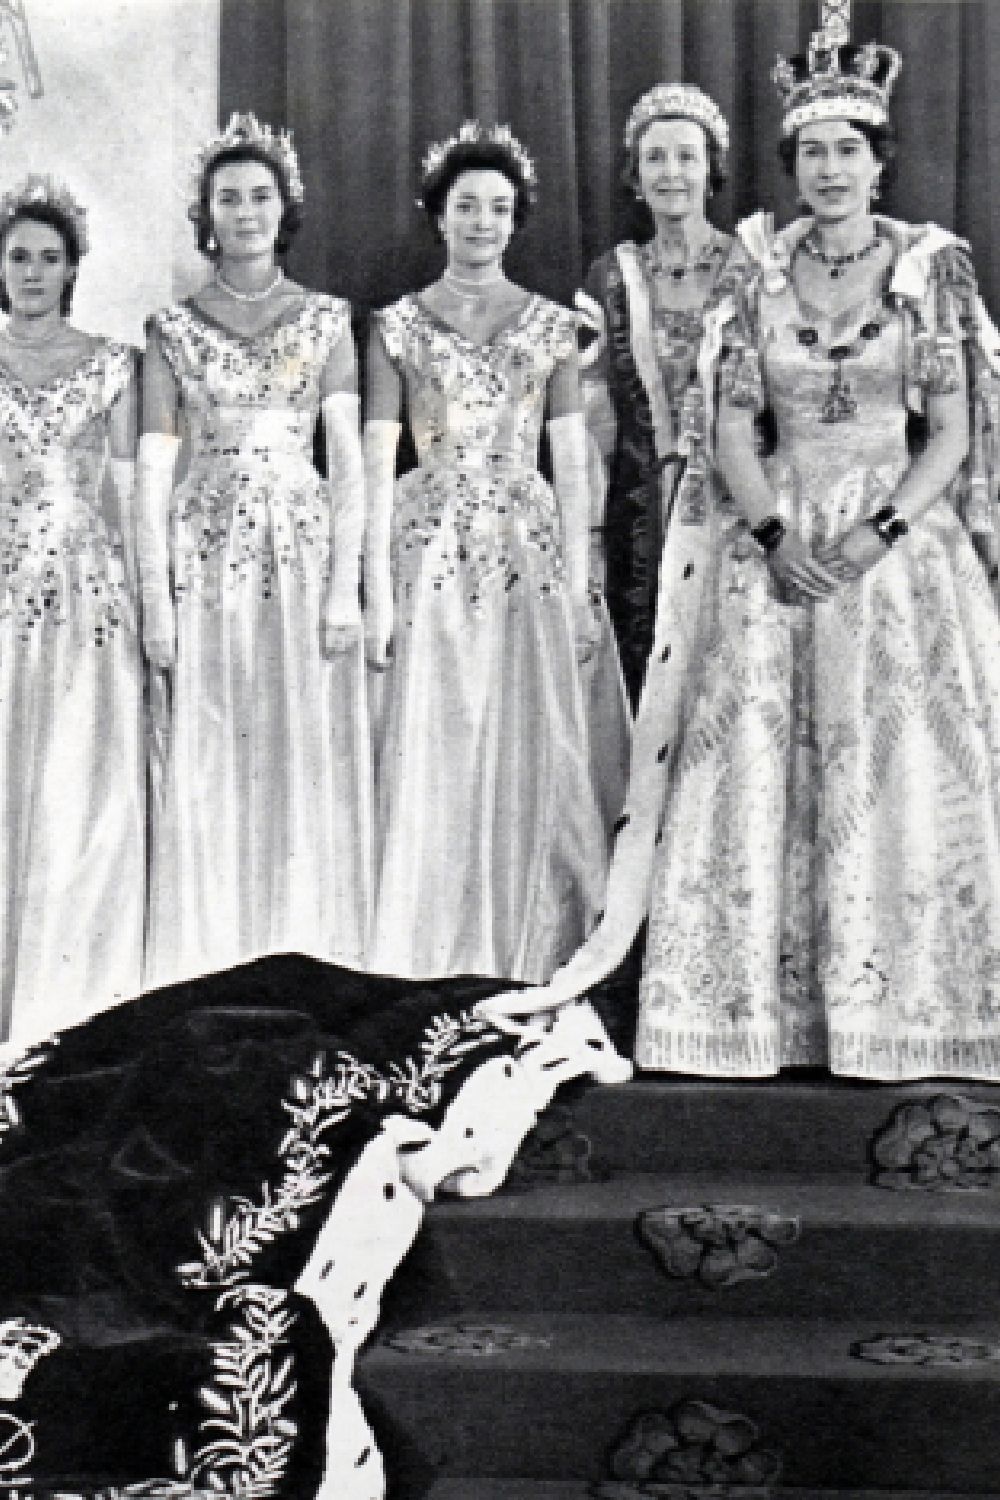 <p>                     Queen Elizabeth II has a Mistress of the Robes and the six Maids of Honour to assist her during her coronation. They carried her long train as she walked down the aisle - much like a wedding. They also wore dresses designed by Norman Hartnell, who crafted the Queen's elaborate gown.                    </p>